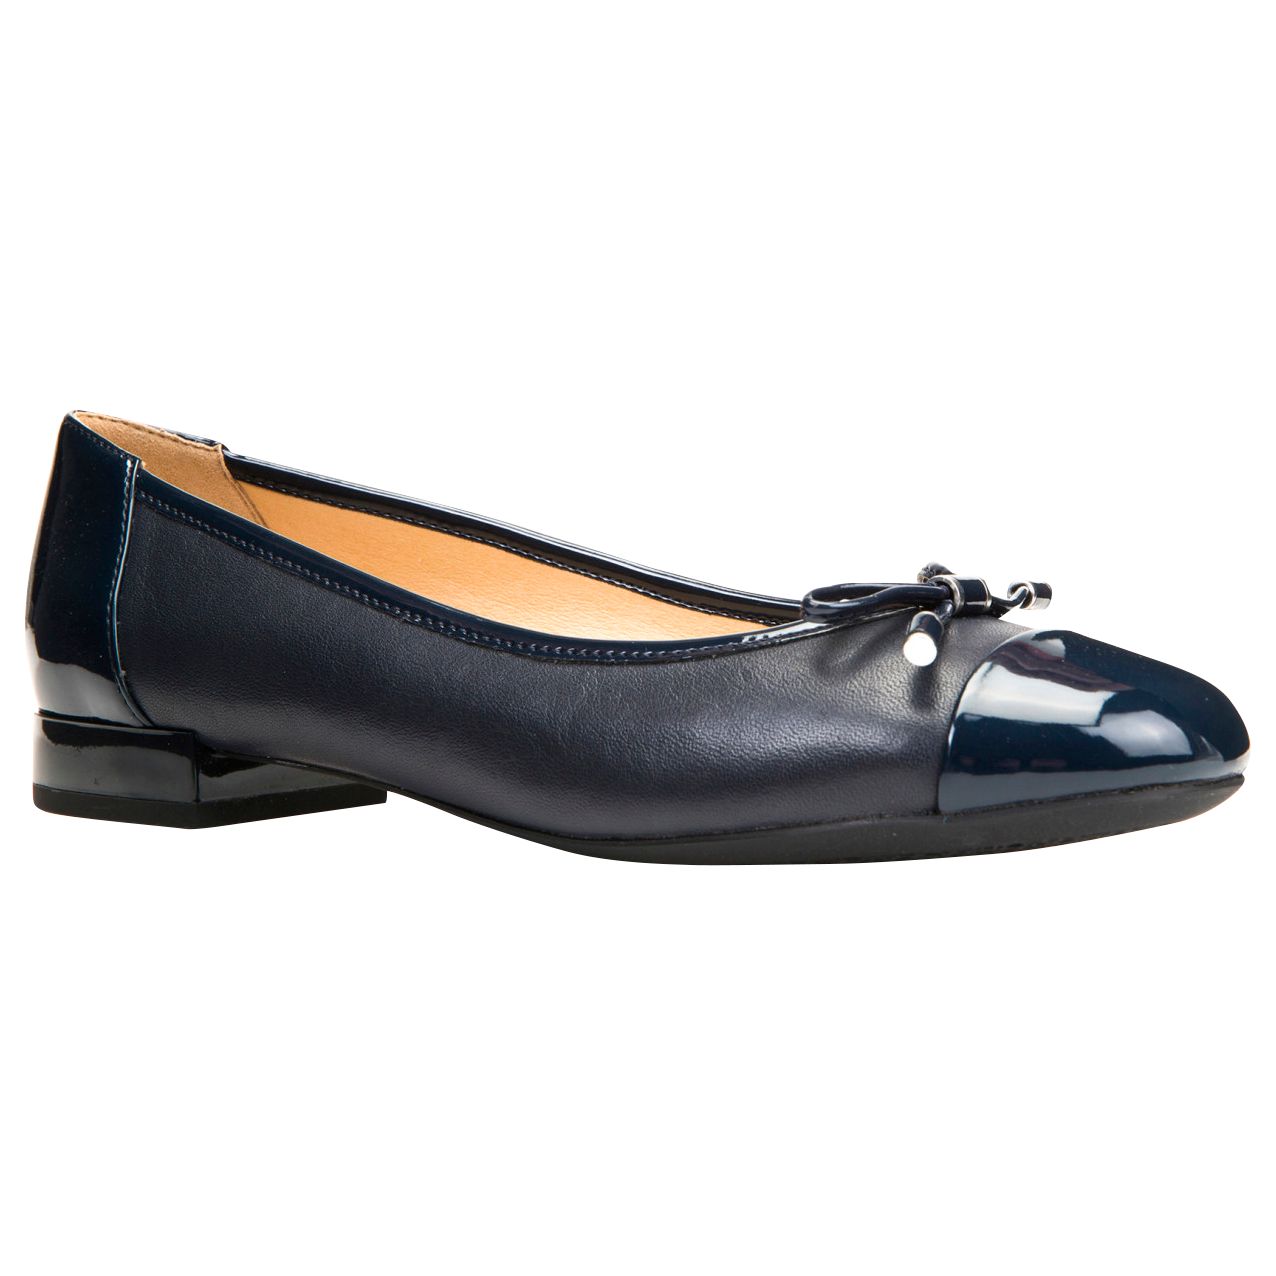 Geox Women's Wistrey Breathable Ballet Pumps, Navy Leather, 6.5